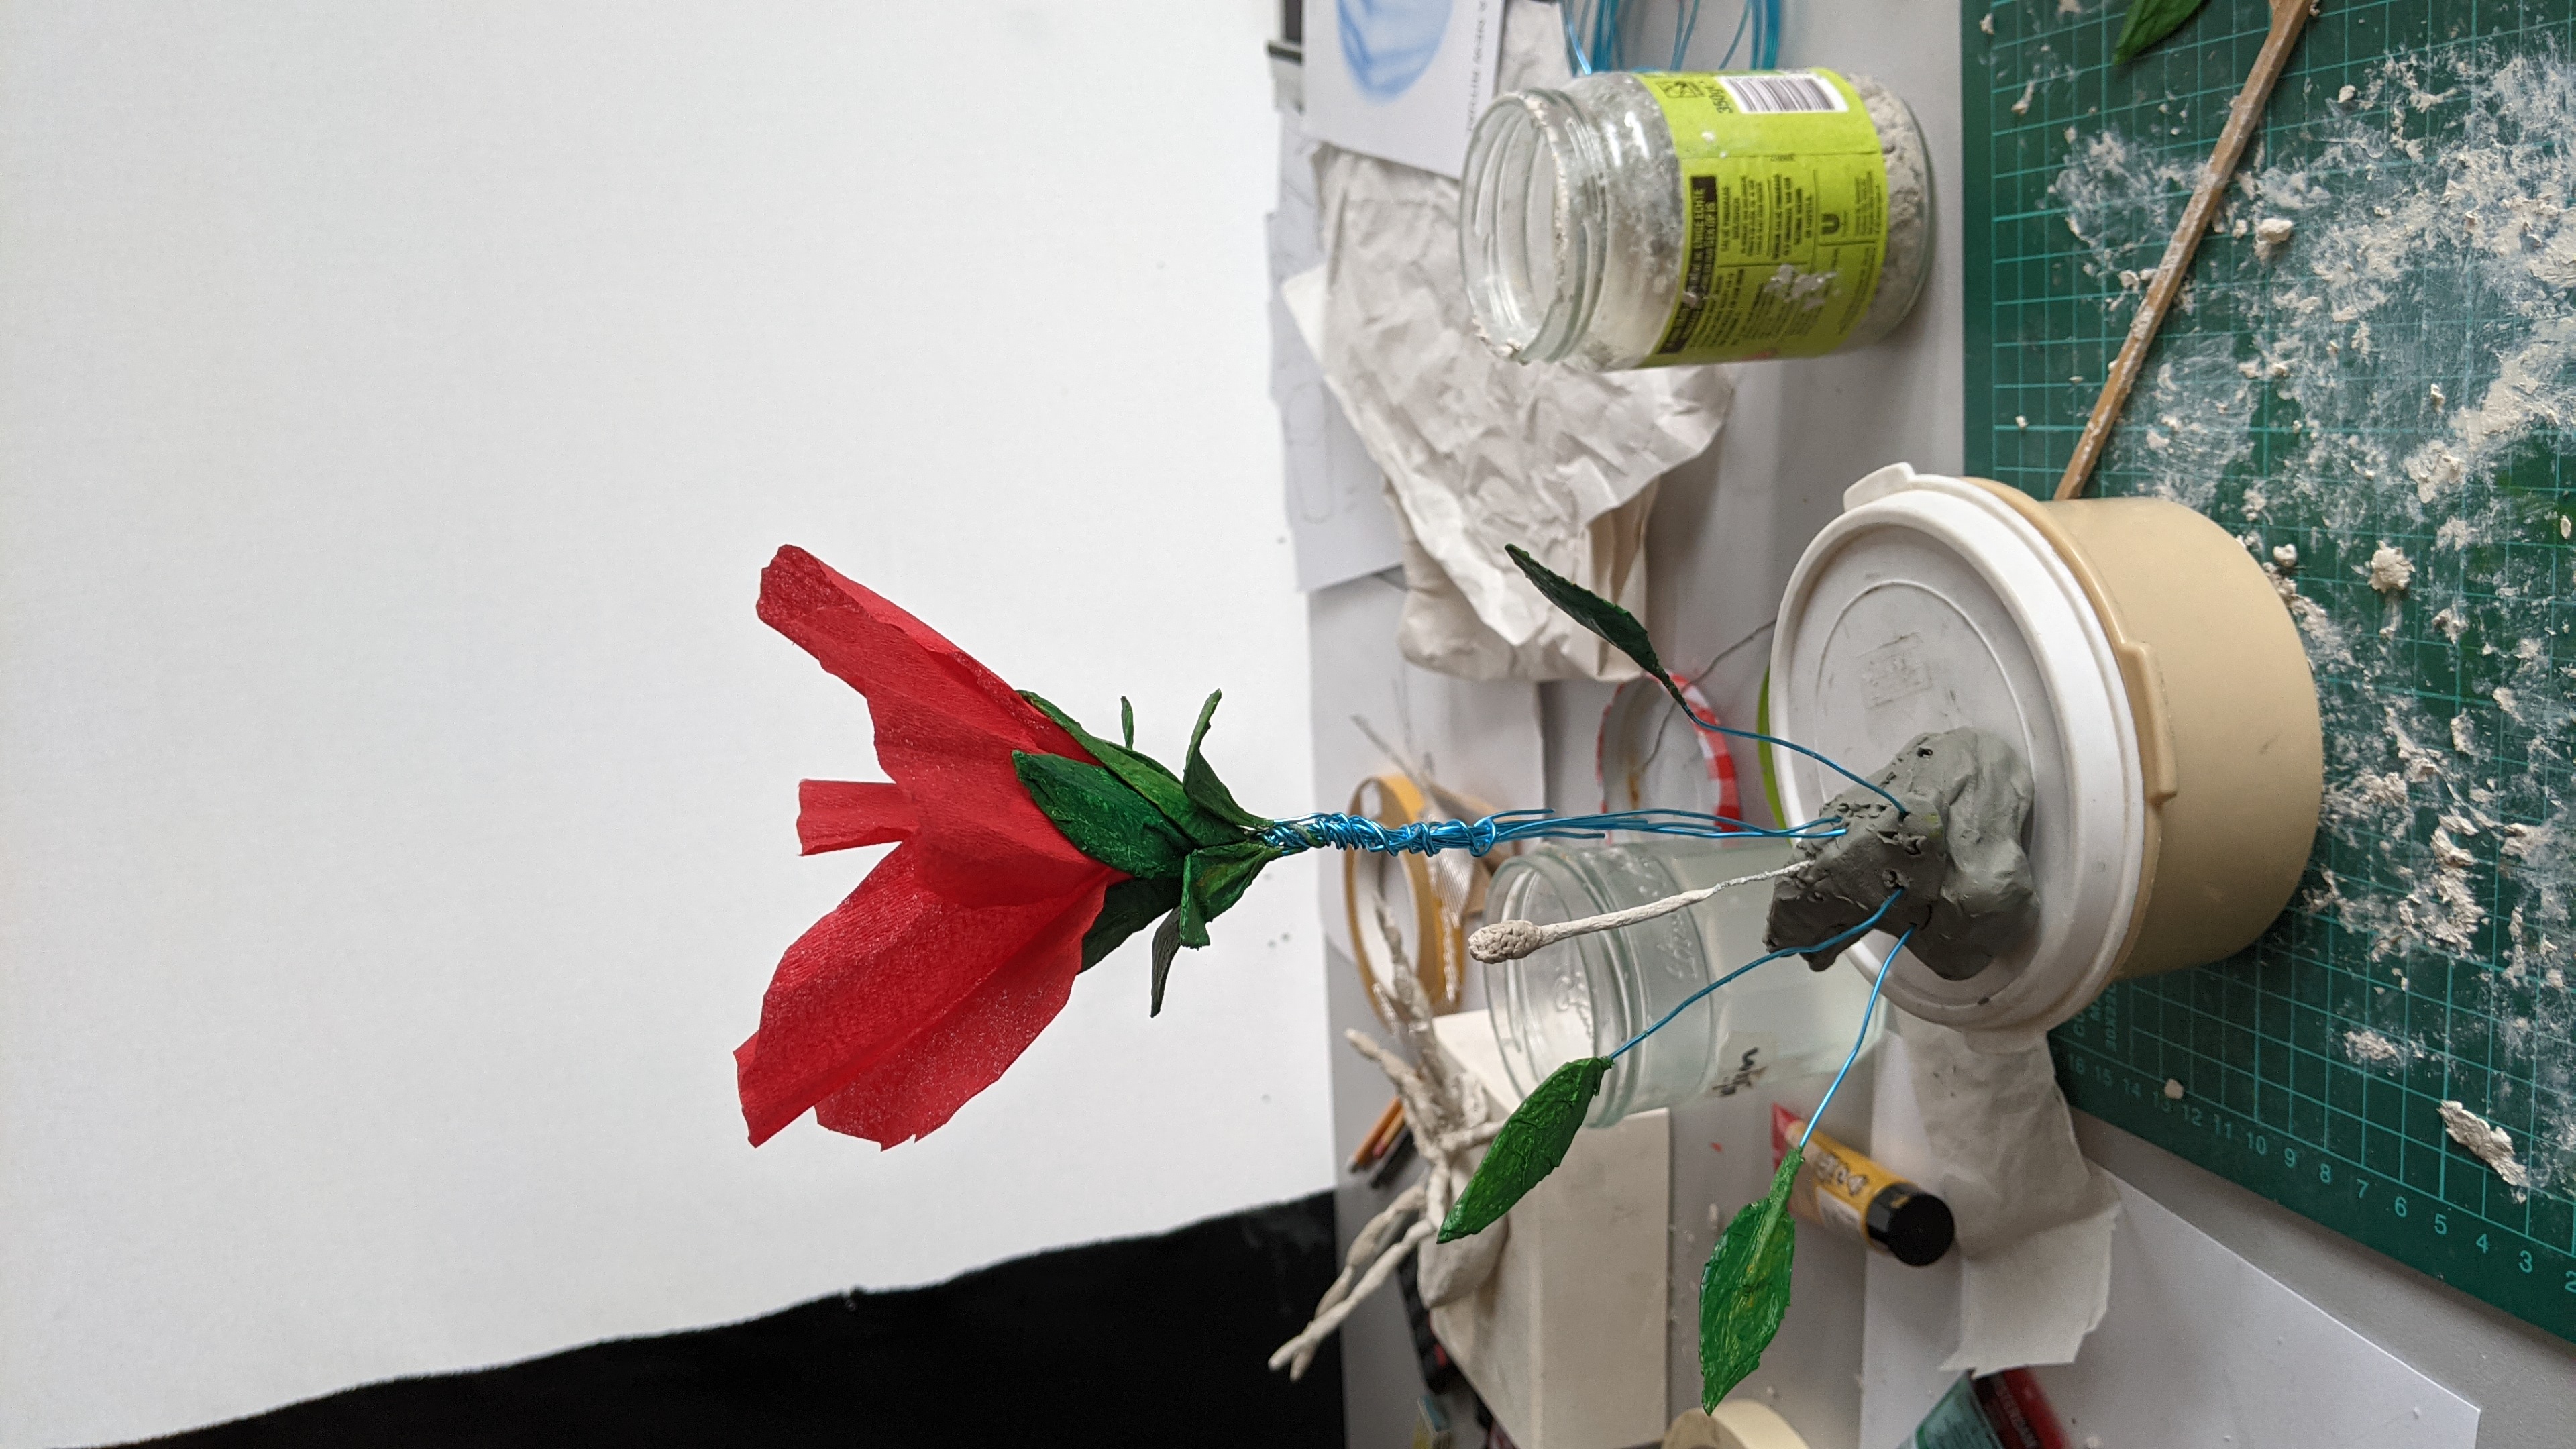 a photograph of a table that has a sculpture of a red hibiscus flower that is in the process of being worked on. it loooks like it's handmade from paper, wire, and paint. behind it, in the background sits a scultpure of a spider that is also under construction and is not painted yet. the table is messy and has supplies like paint, paper, glue, and wire strewn across it.